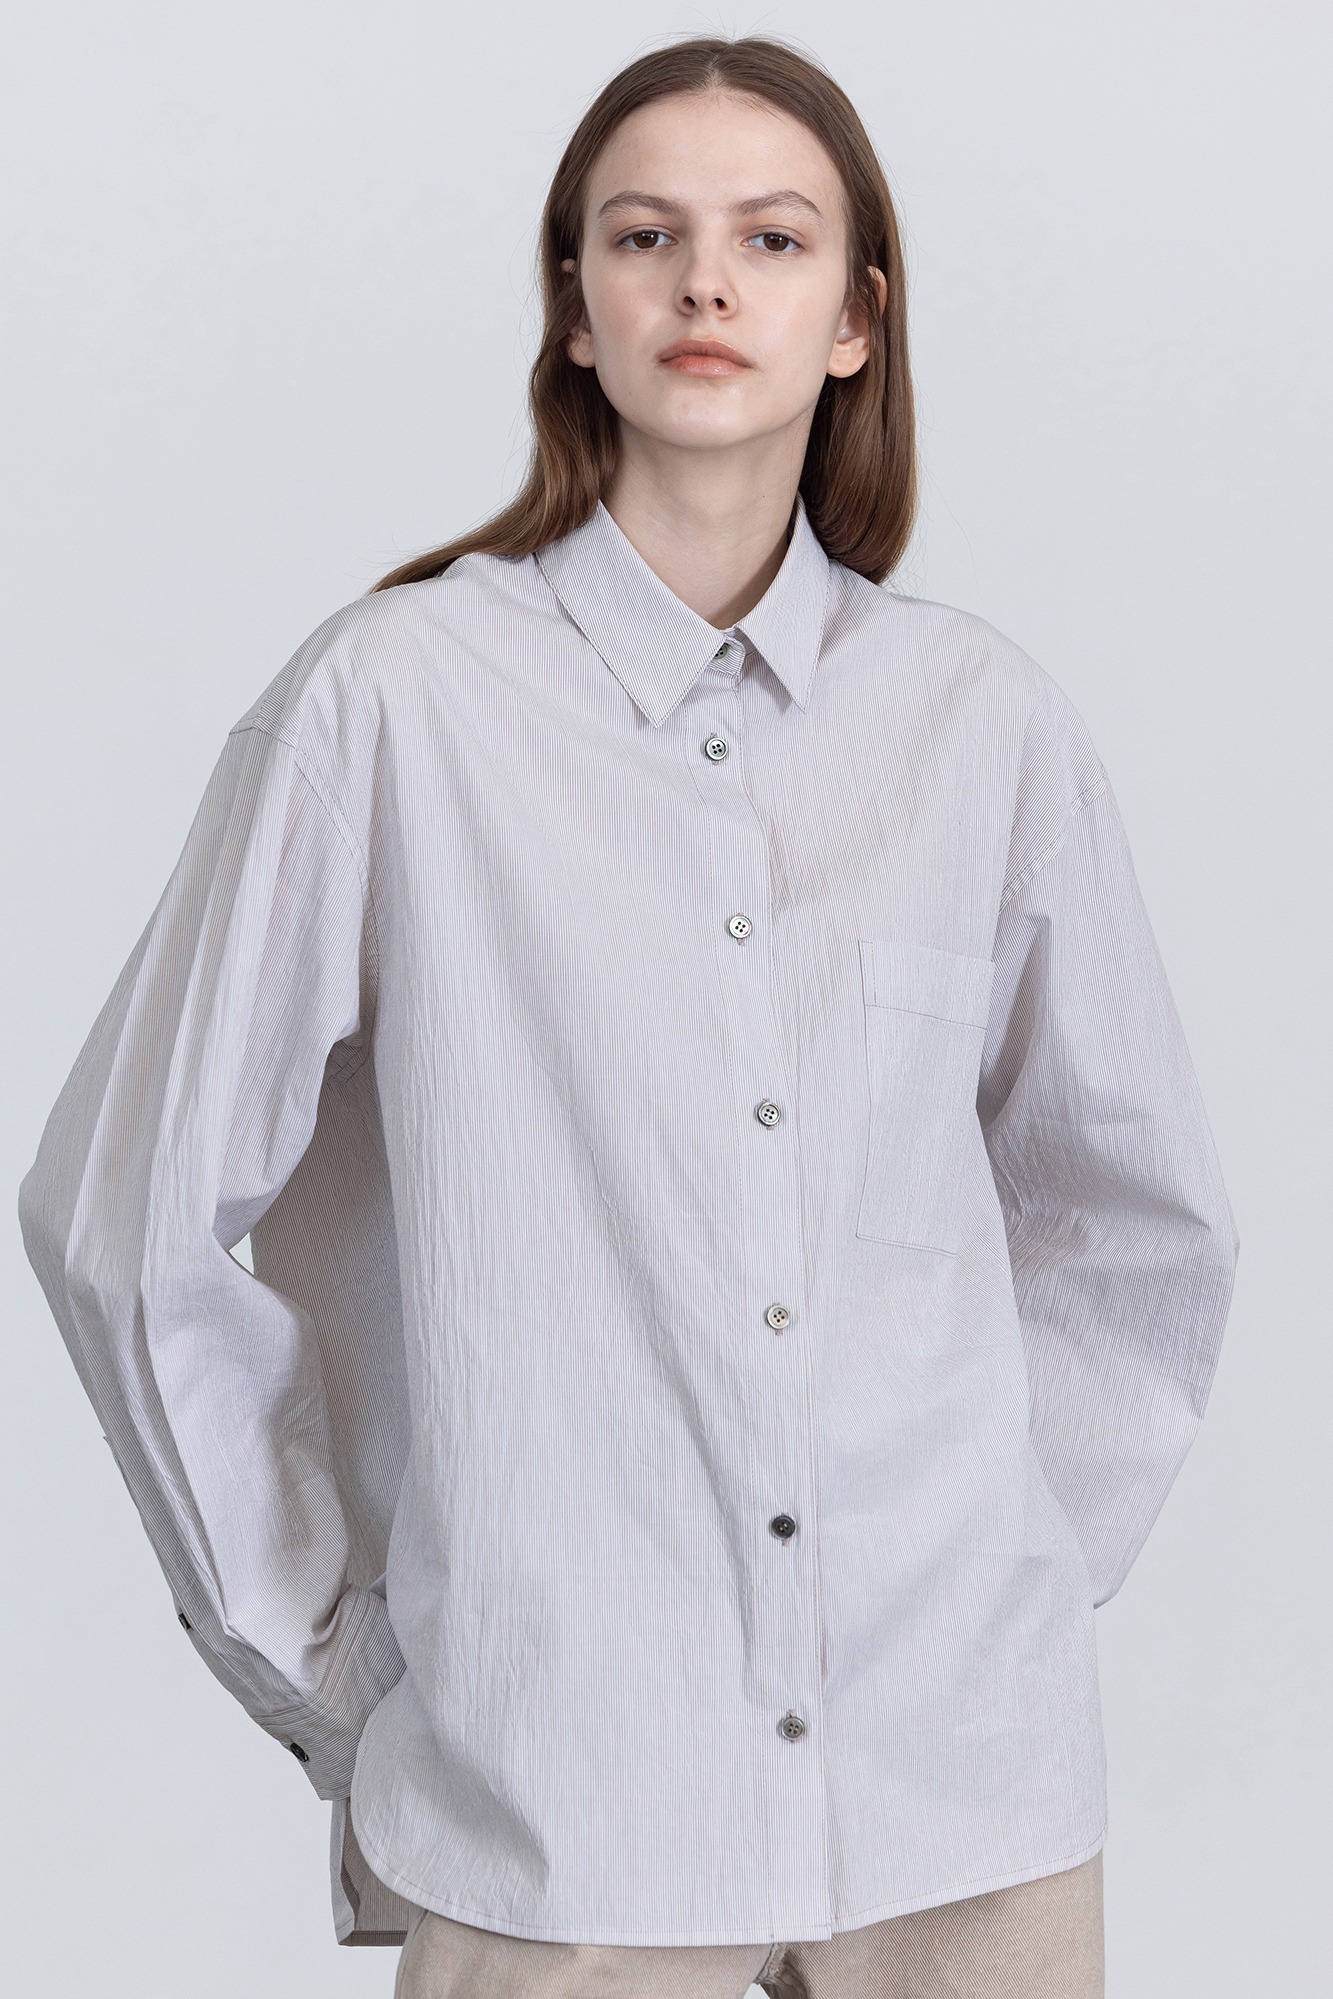 Relaxed Cotton Shirts - Beige Stripe